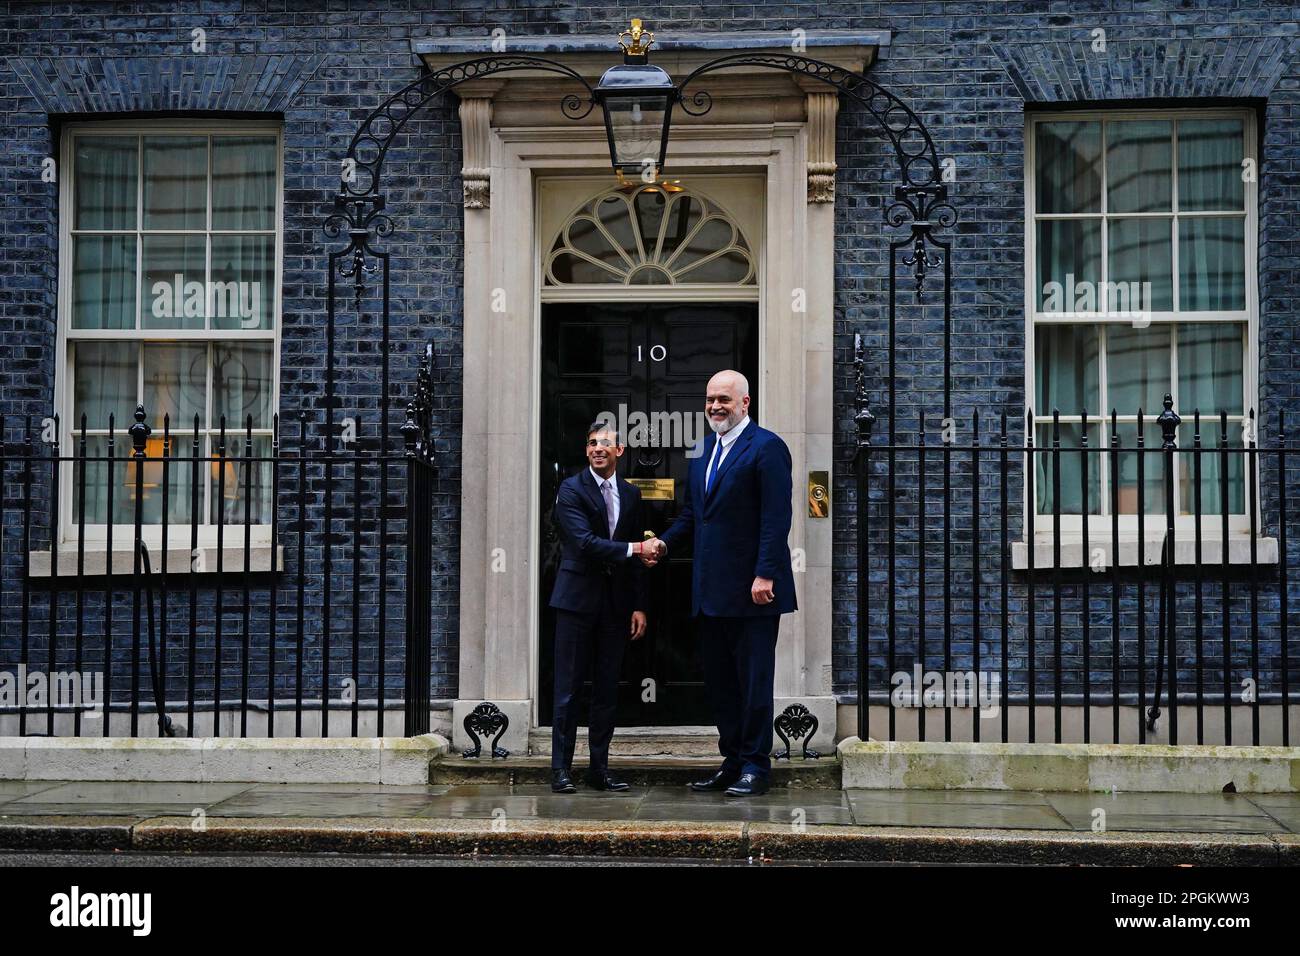 Prime Minister Rishi Sunak (left) welcomes the Albanian Prime Minister Edi Rama to 10 Downing Street, London, ahead of their meeting. Stock Photo